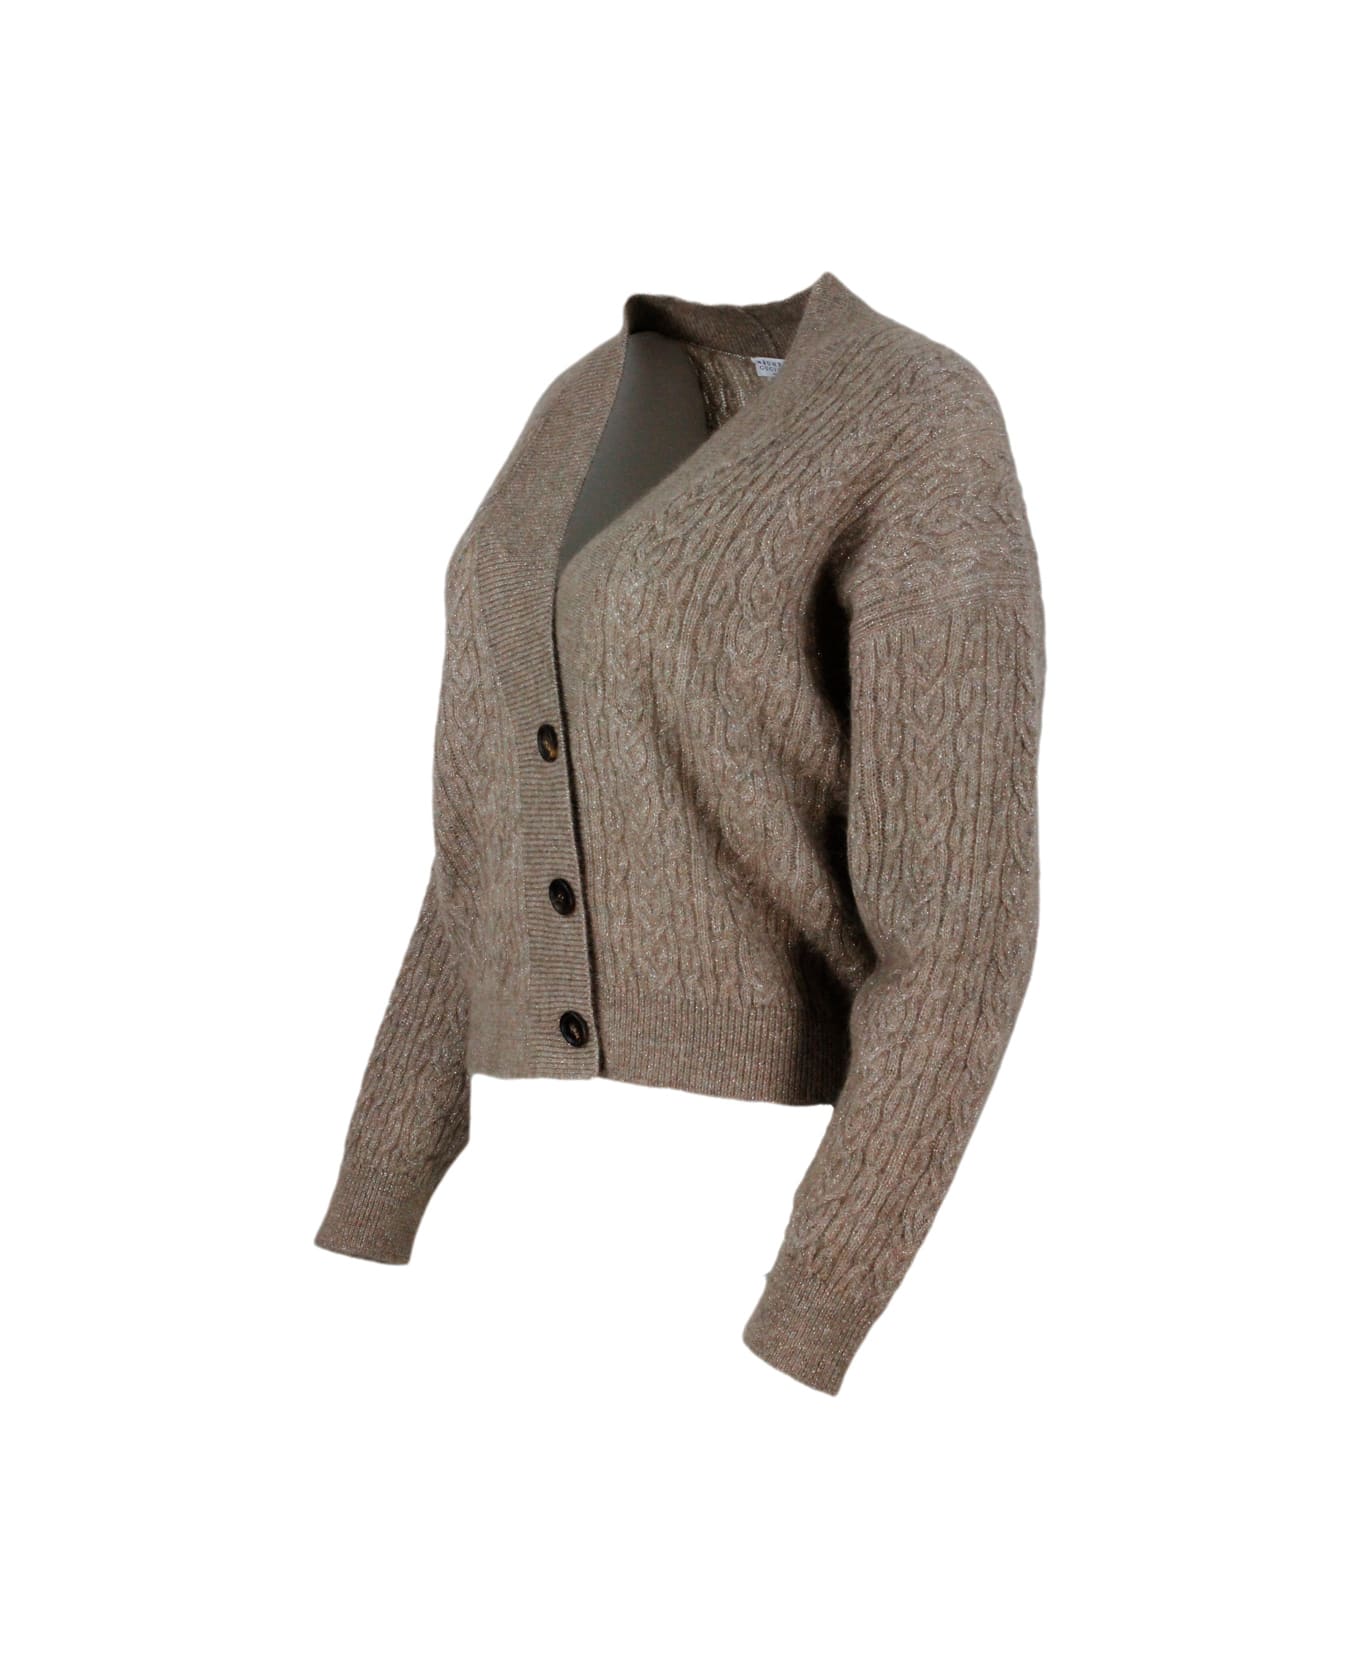 Brunello Cucinelli Cable Knit Wool Blend Cardigan Sweater - Brown